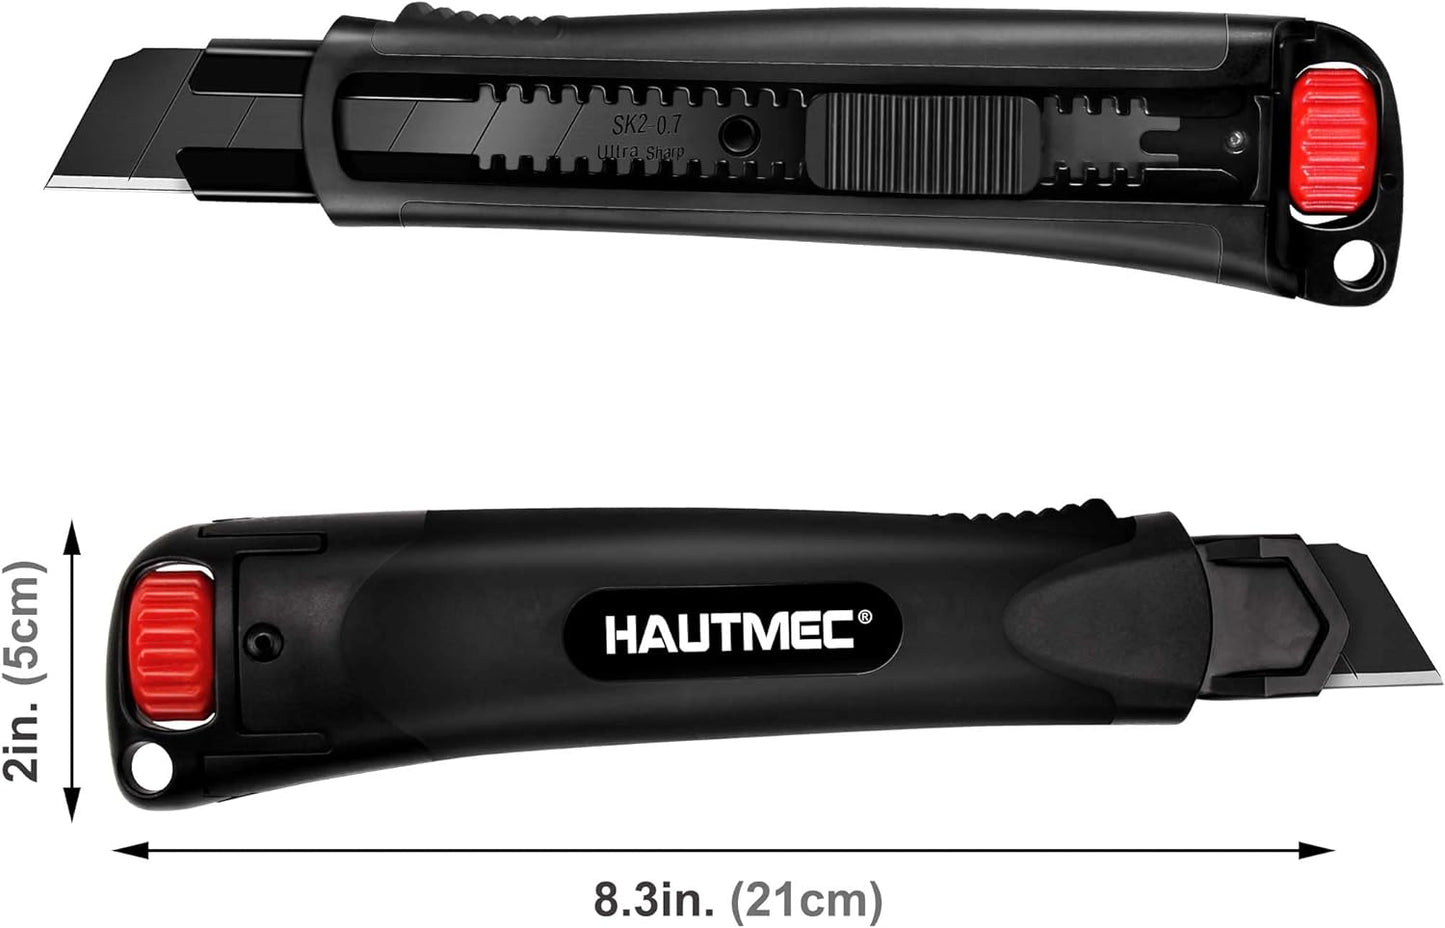 HAUTMEC 25mm Extra Heavy Duty Utility Knife with Double Lock Mechanism, Auto-Lock and Ratchet- Lock for Double Safety, SK2 Sharp Black Blade for Industrial or Construction Applications HT0254-KN